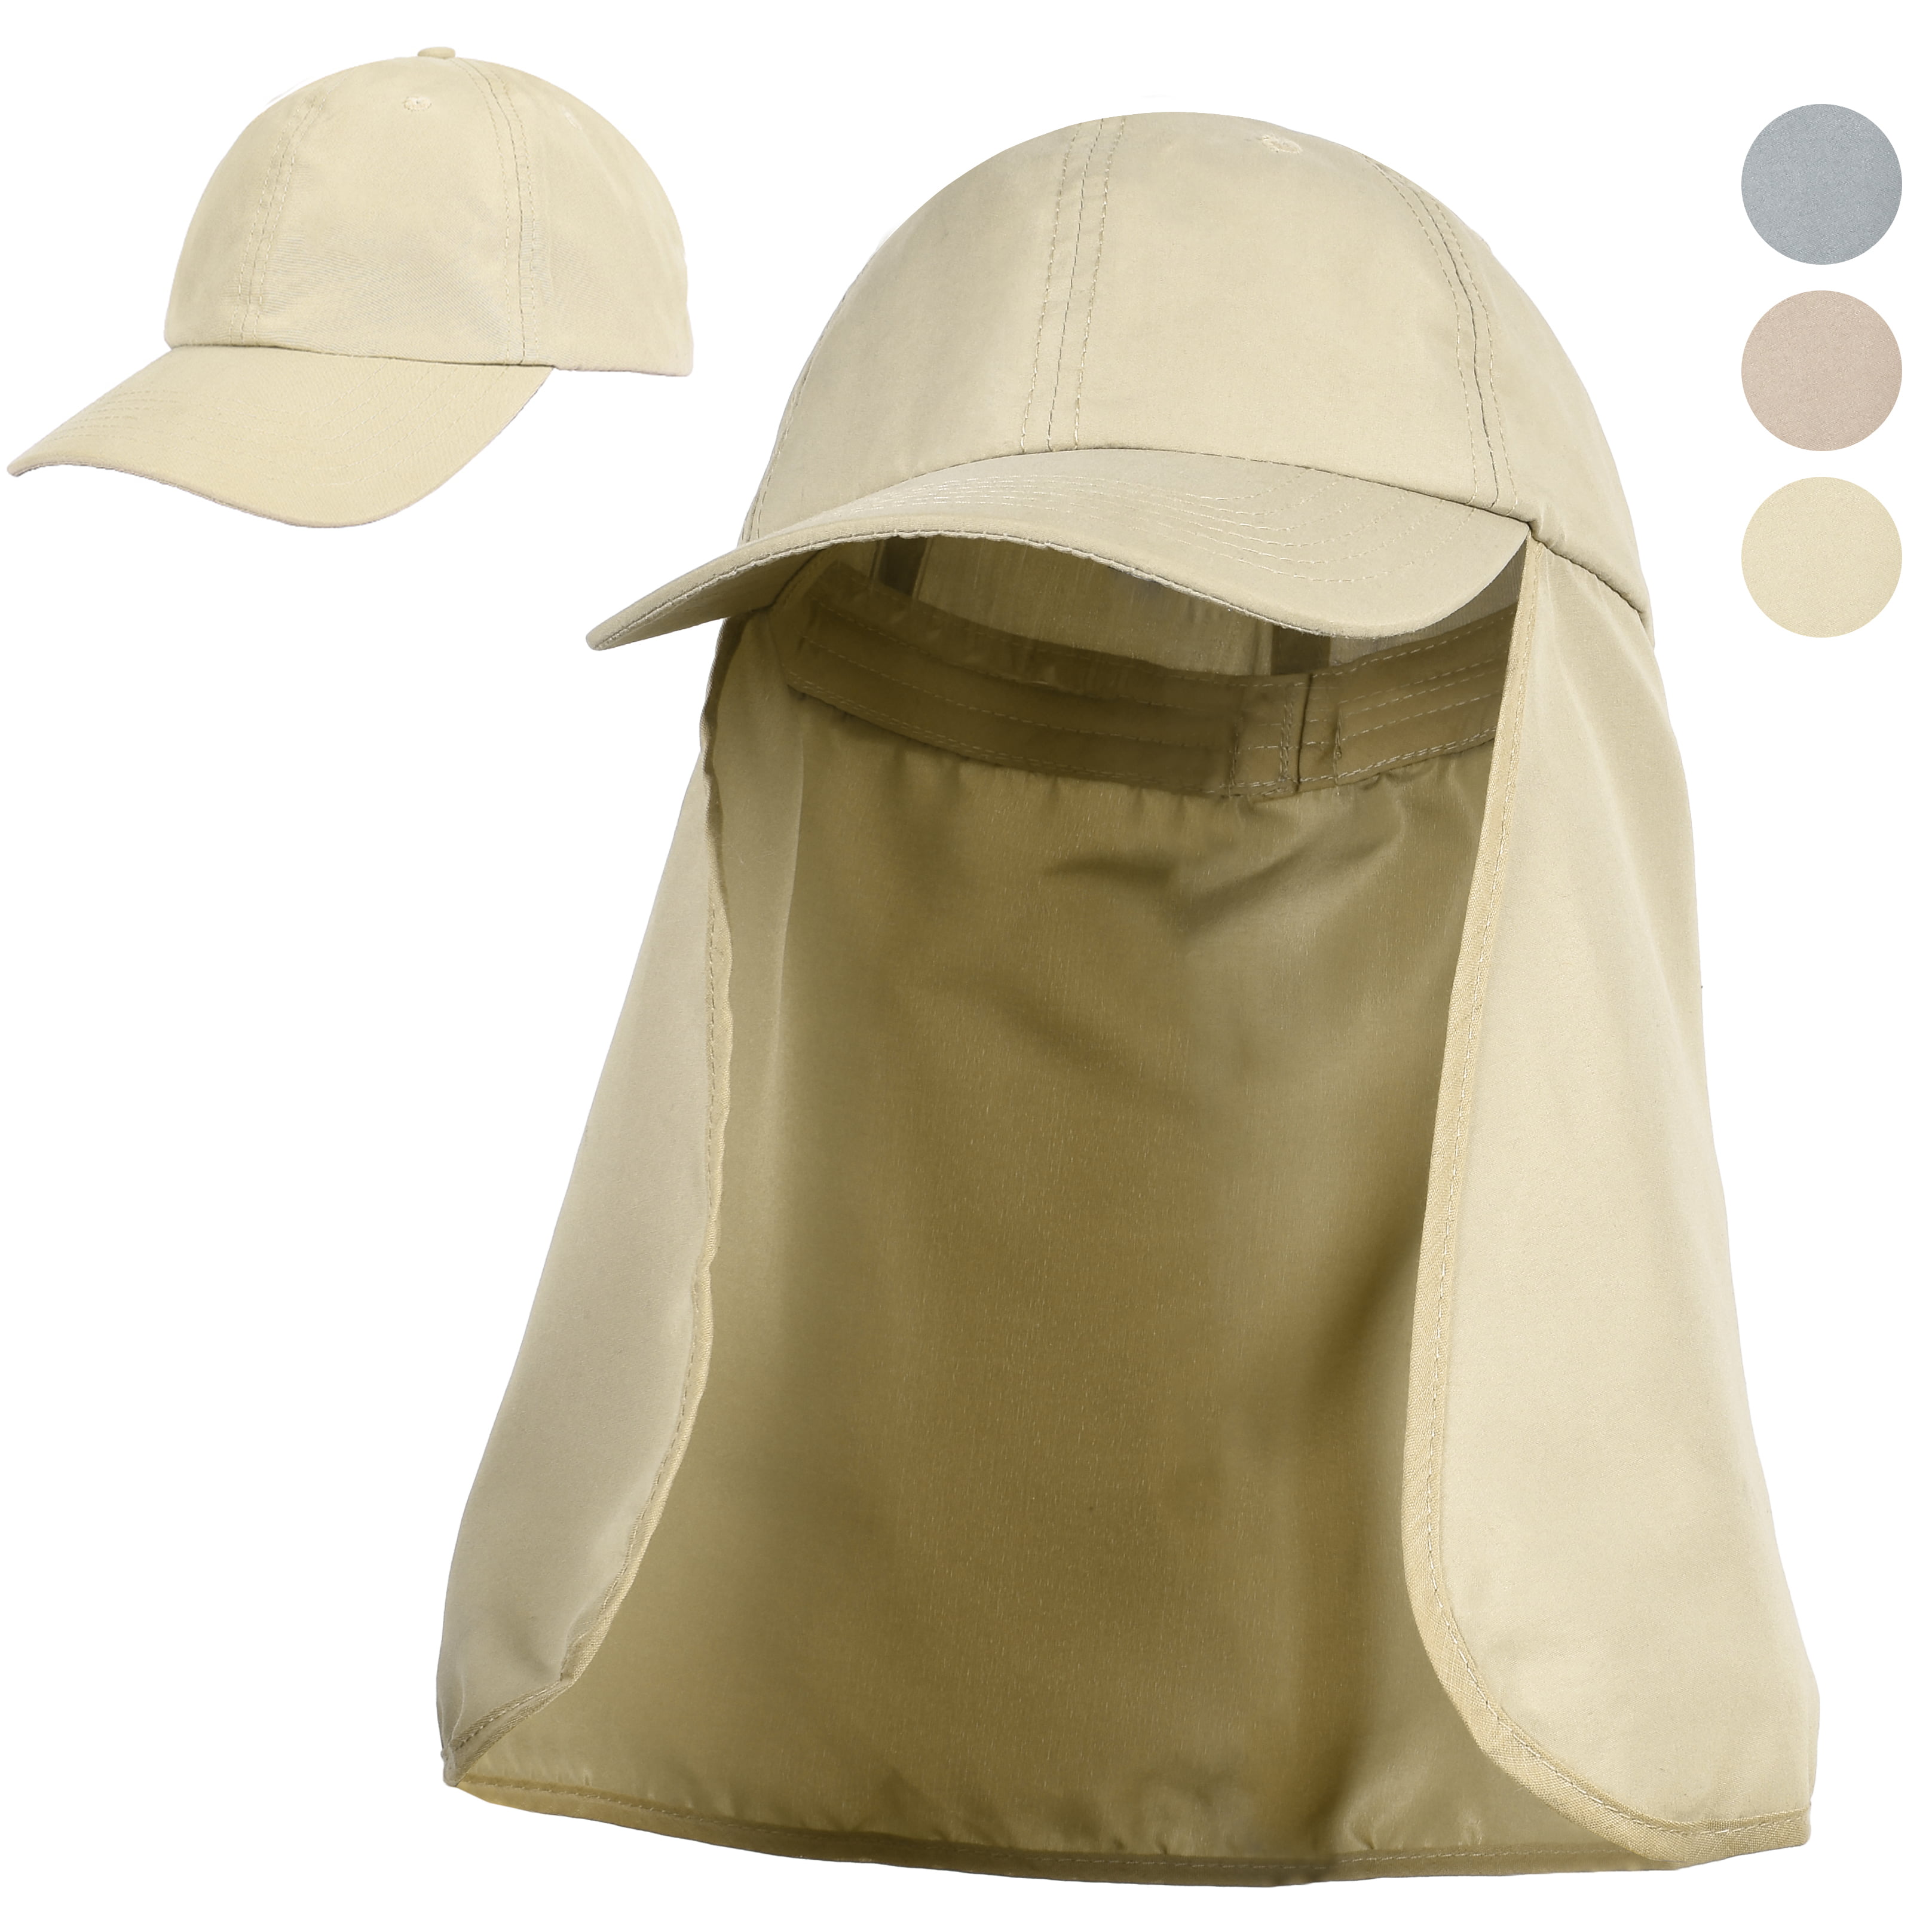 Outdoor UV Protection Baseball Hat Cap Ear Flap Neck Cover Camo Fishing Hunting